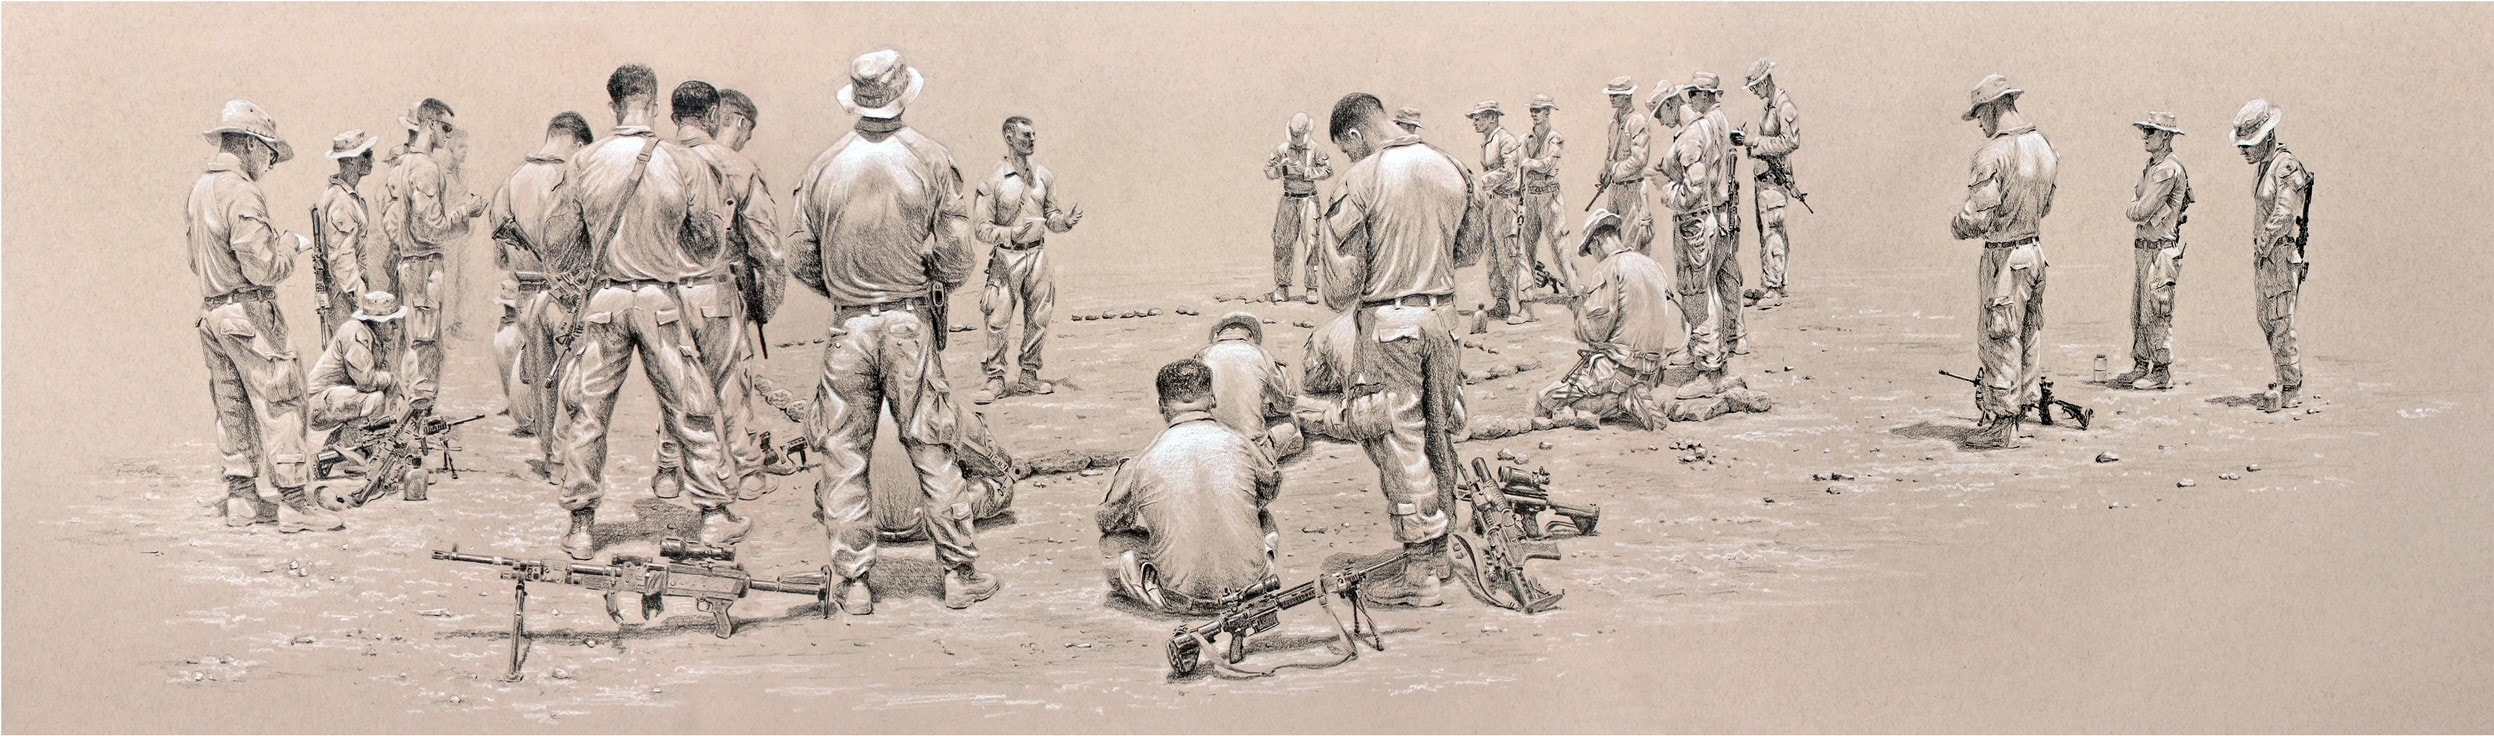 A long horizontal sketch of a briefing of service members in the Desert - 2nd Bn 6th Marines, 26th MEU - Djibouti, Africa